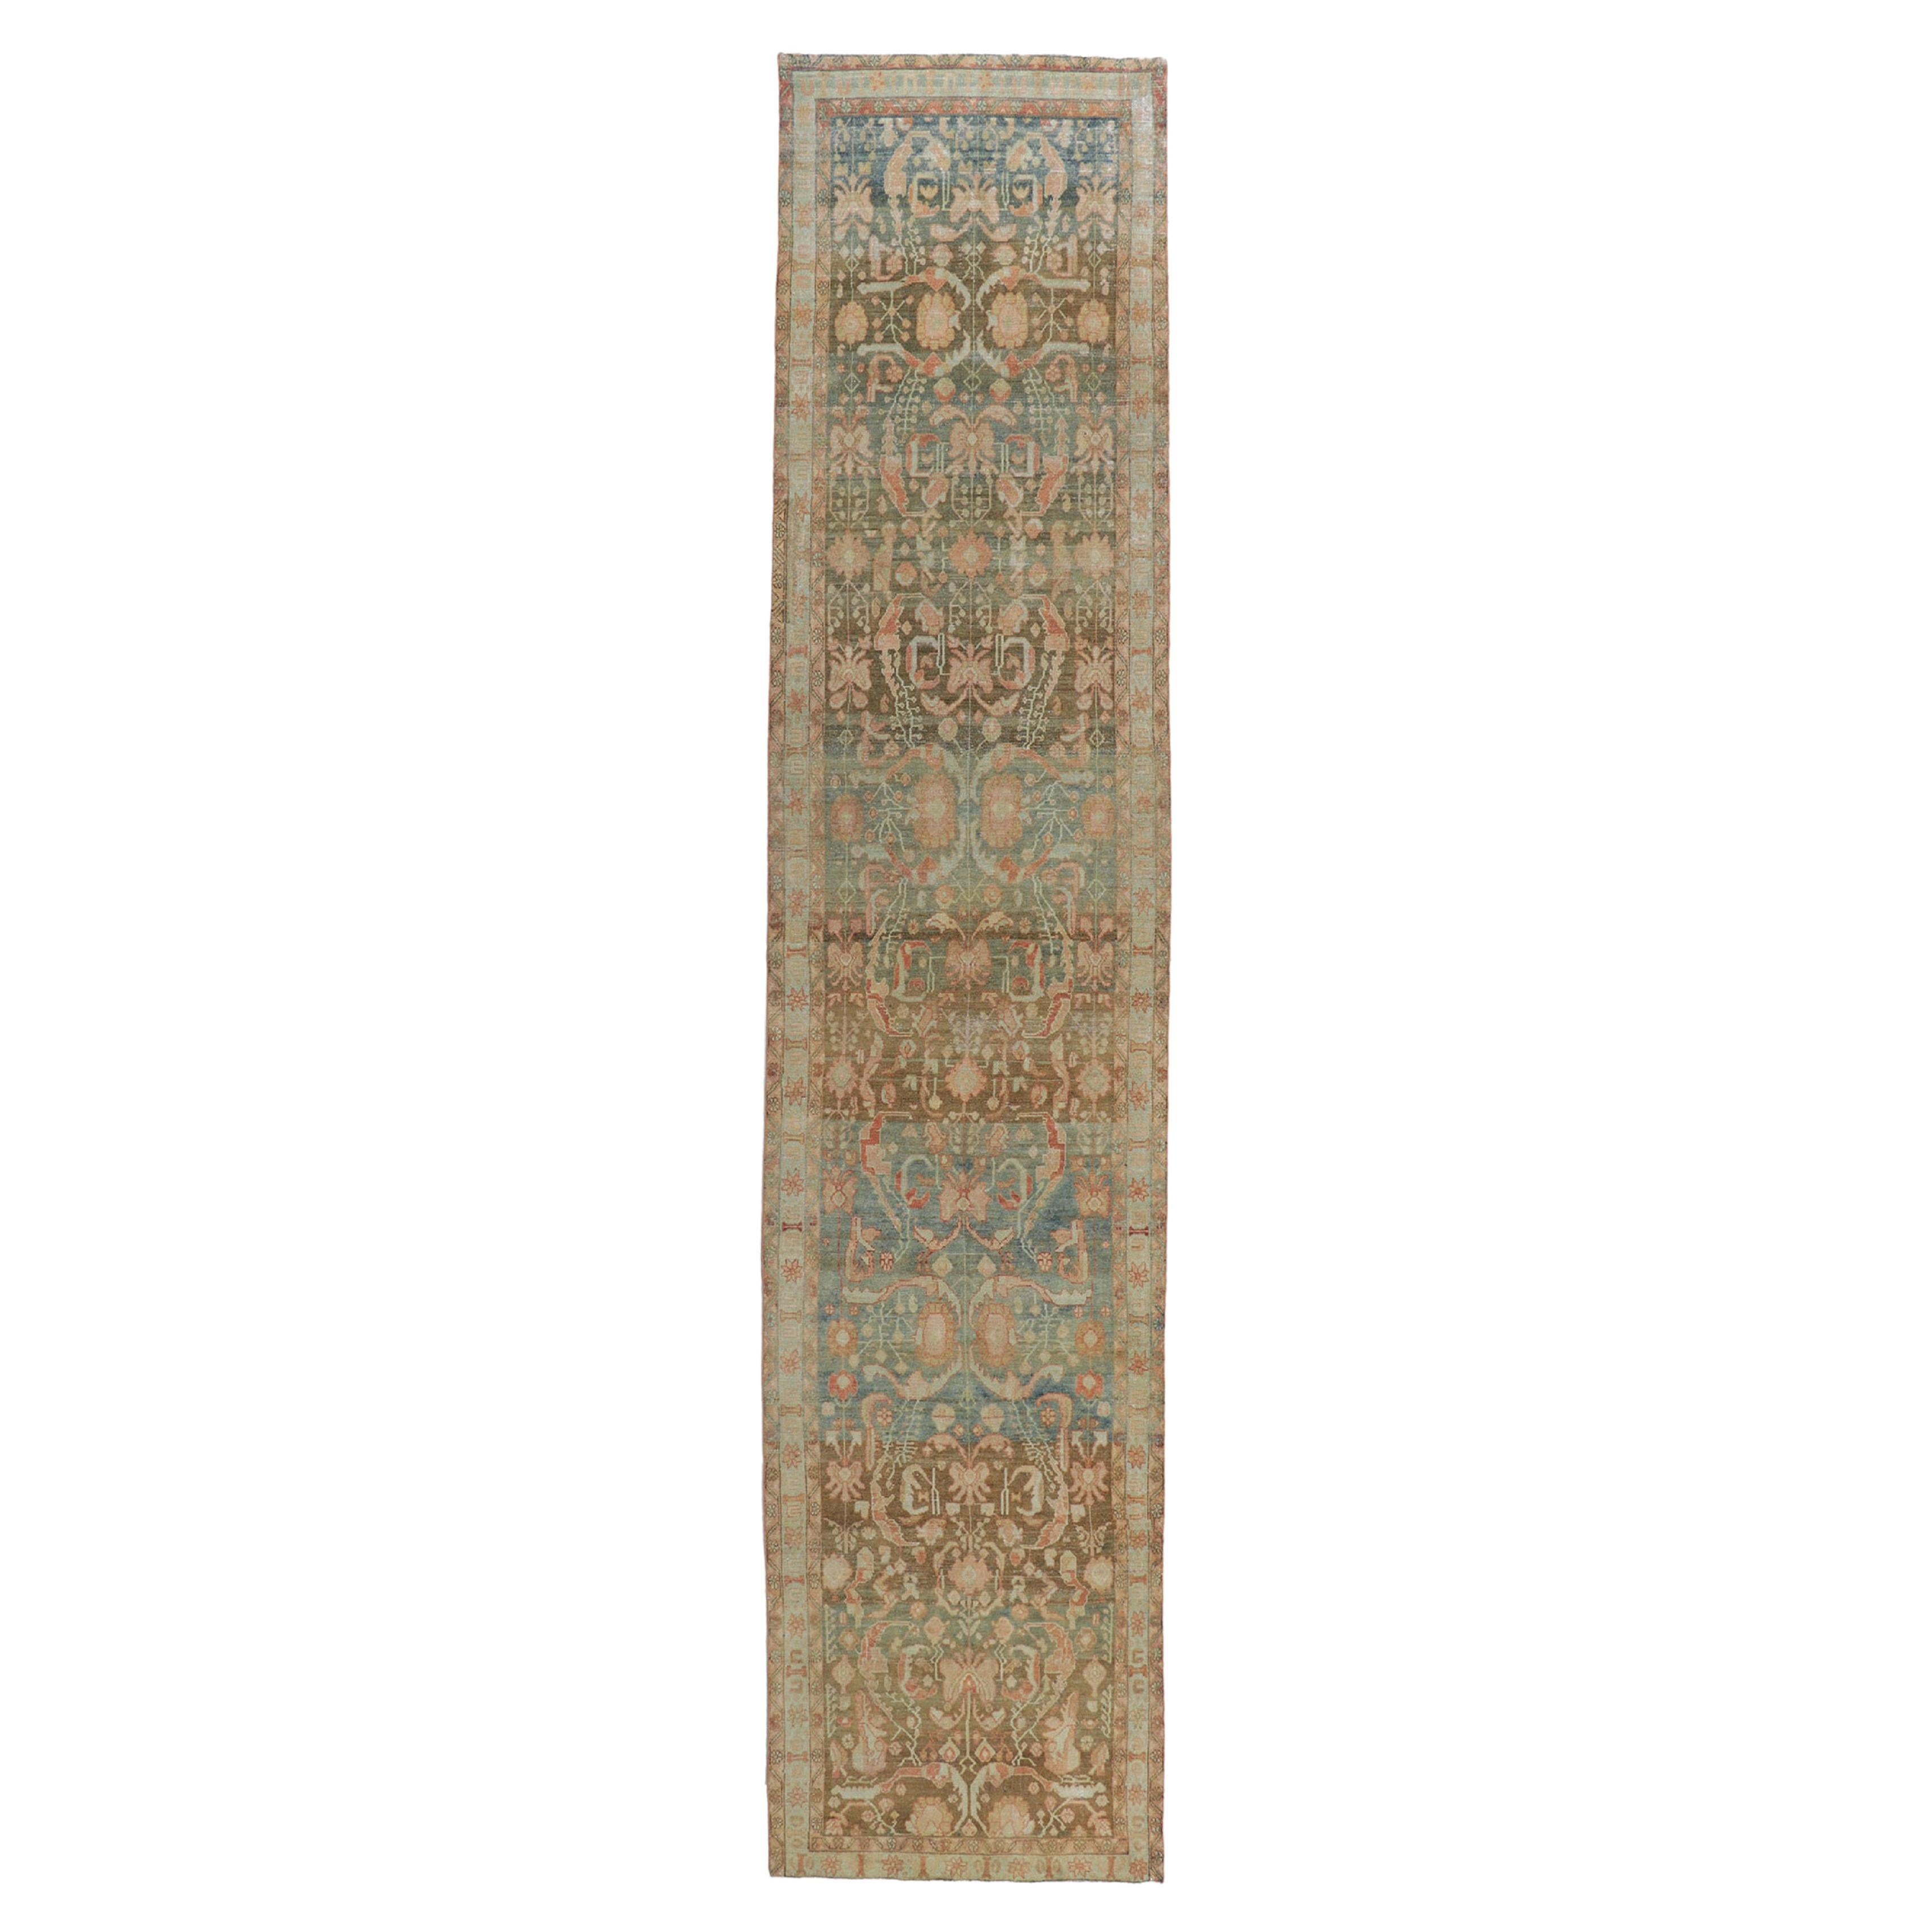 Antique-Worn Persian Malayer Rug, Earth-Tone Elegance Meets Relaxed Refinement